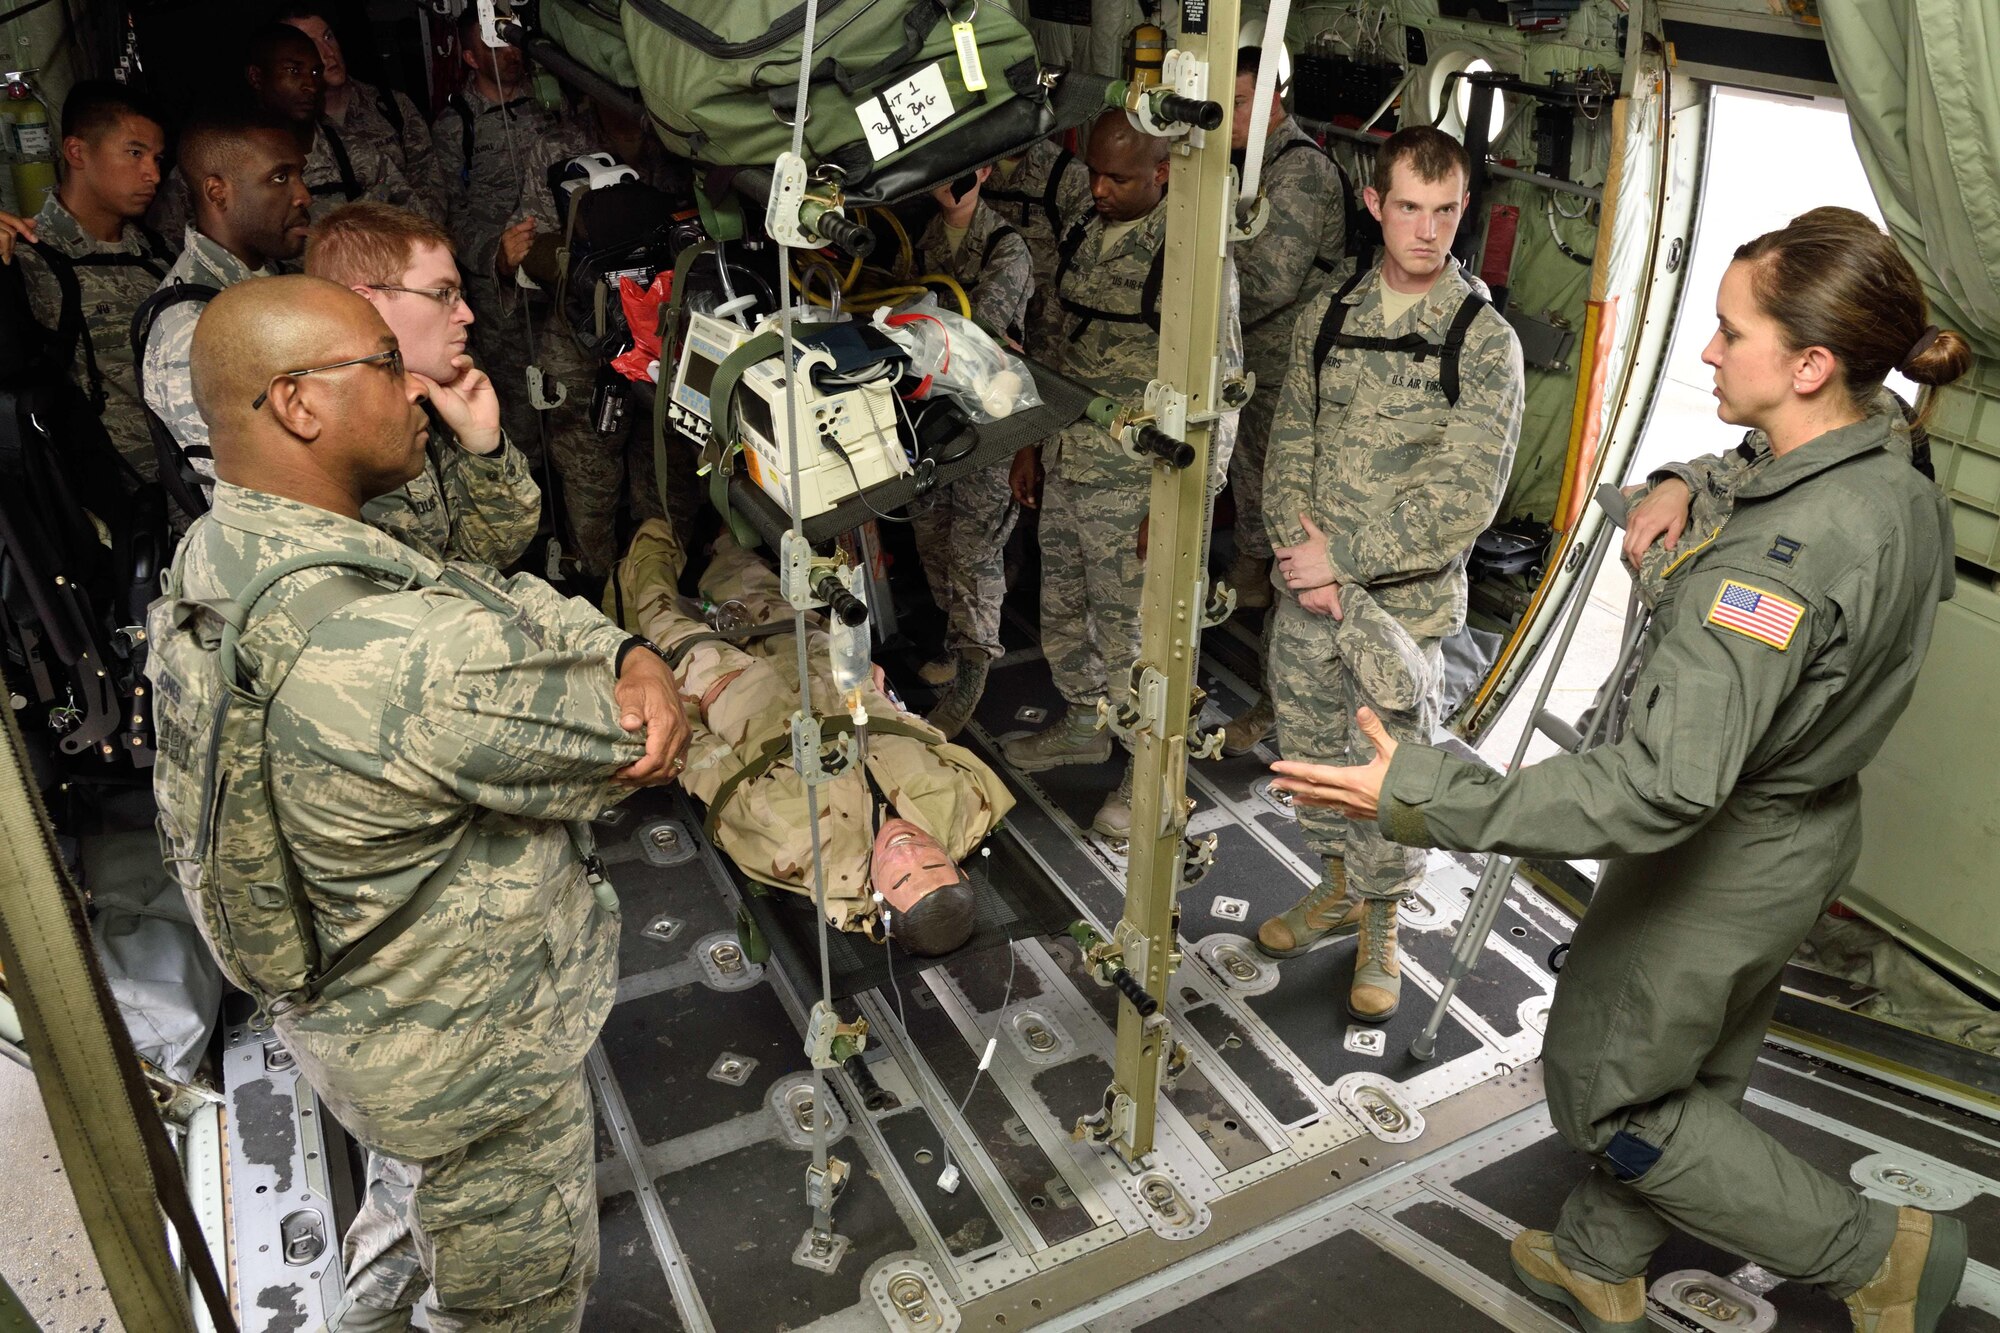 Capt. Kristen Parham (right), 36th Aeromedical Evacuation Squadron nurse, addresses a group of Air Force chaplain candidates during their tour of the 403rd Wing at Keesler Air Force Base, Mississippi, July 8, 2017. The candidates visited with several Air Force wings to get a better feel for how they support the Air Force mission and to meet with the Airmen that could interact with during their careers as chaplains. (U.S. Air Force photo/Tech. Sgt. Ryan Labadens)